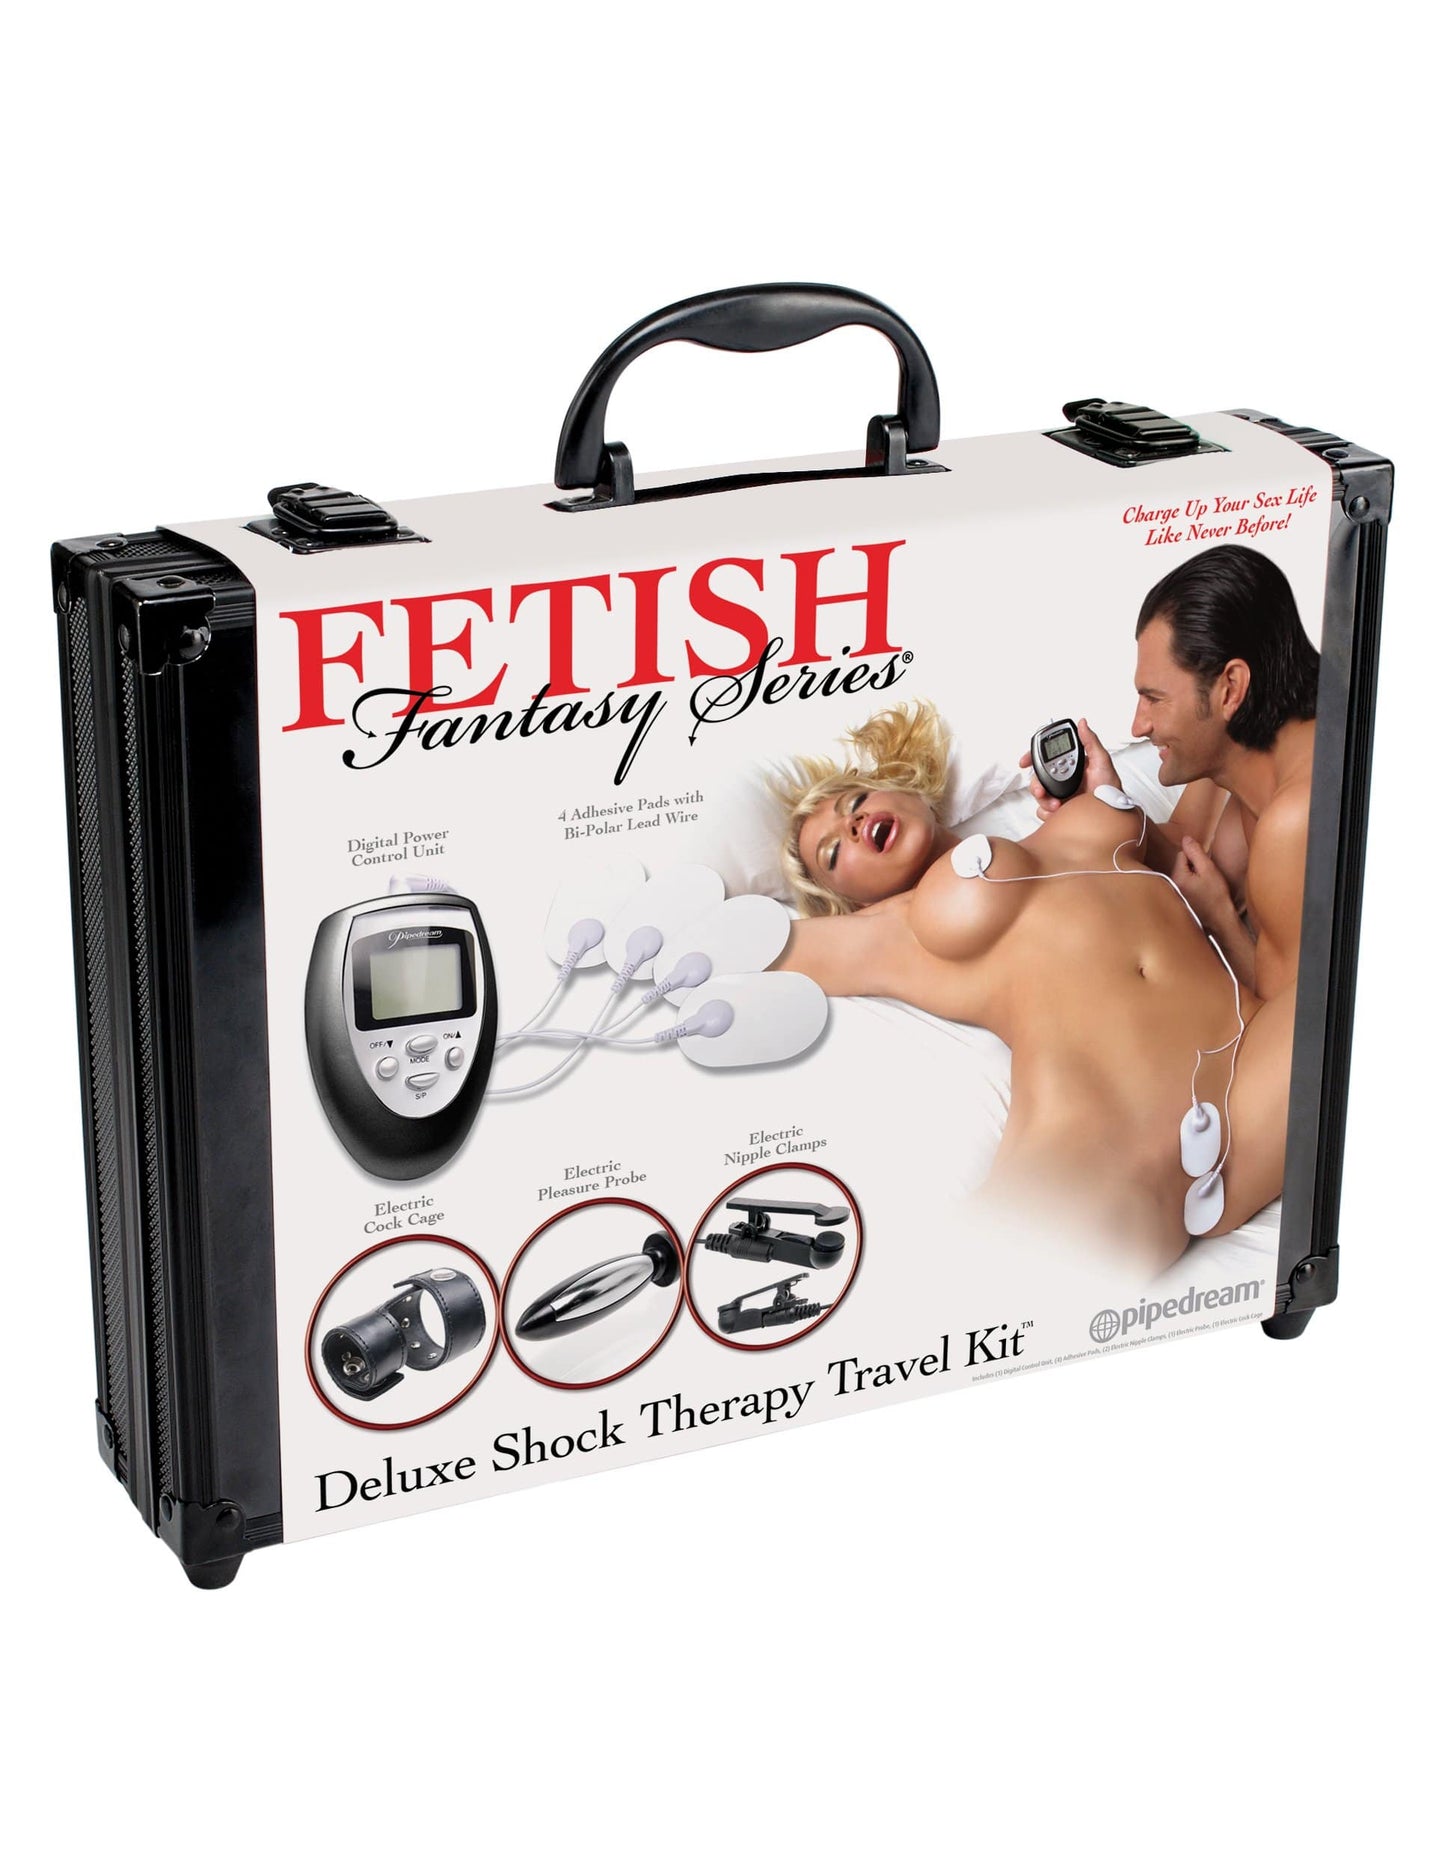 fetish fantasy series deluxe shock therapy travel kit